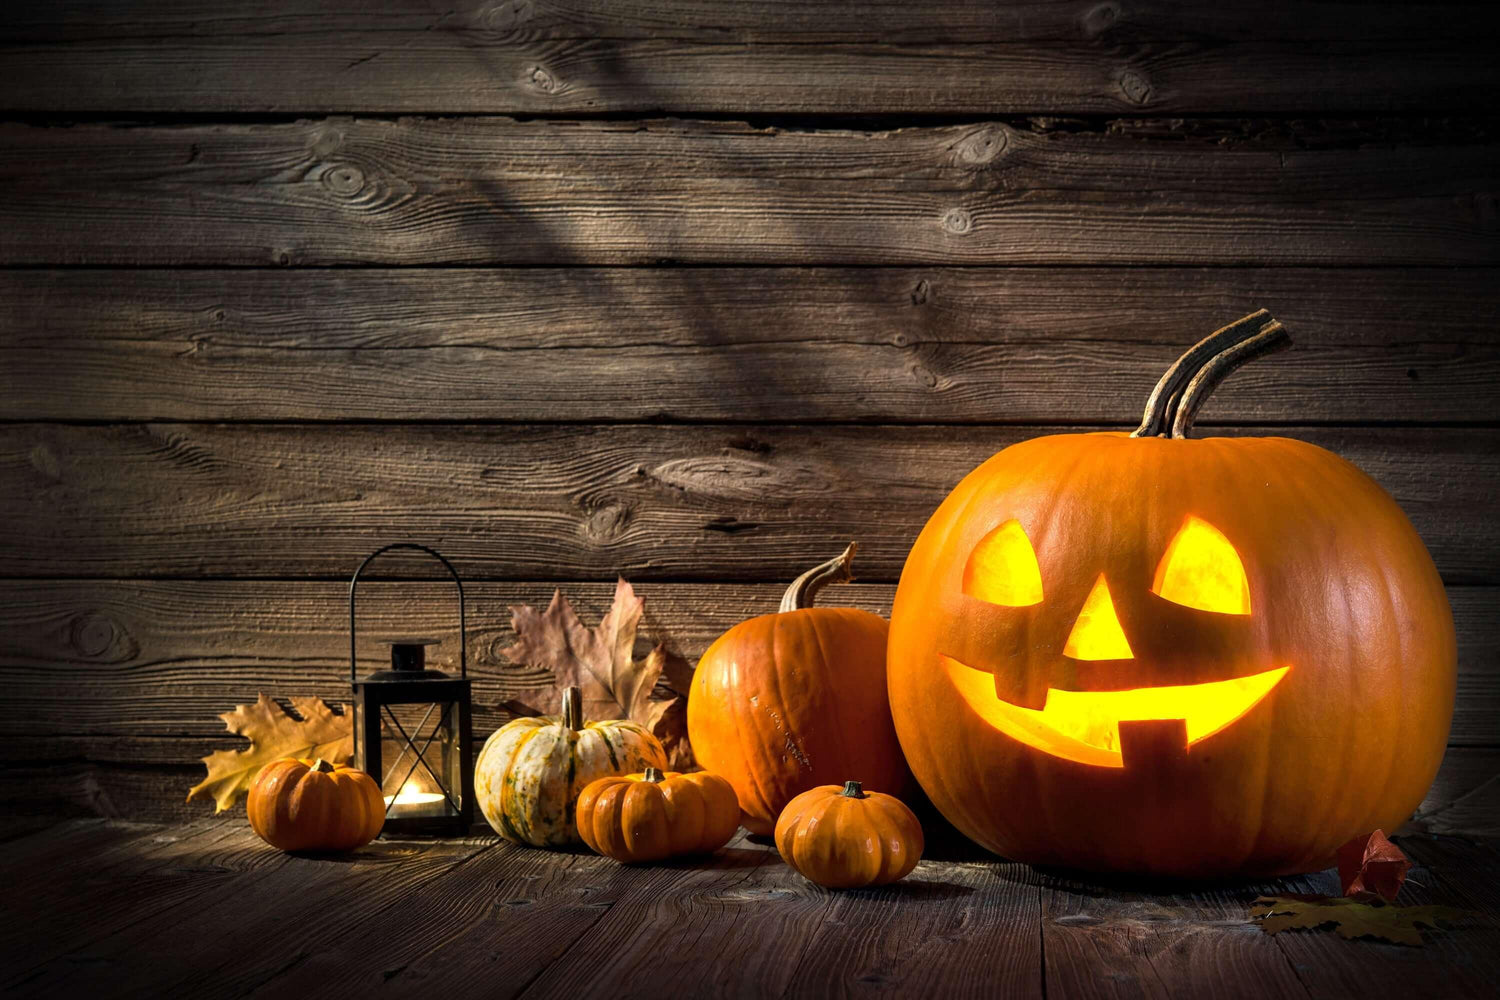 Trick-or-Treat for Adults: Up Your Halloween Game With These Fun Party Gifts and Tricks